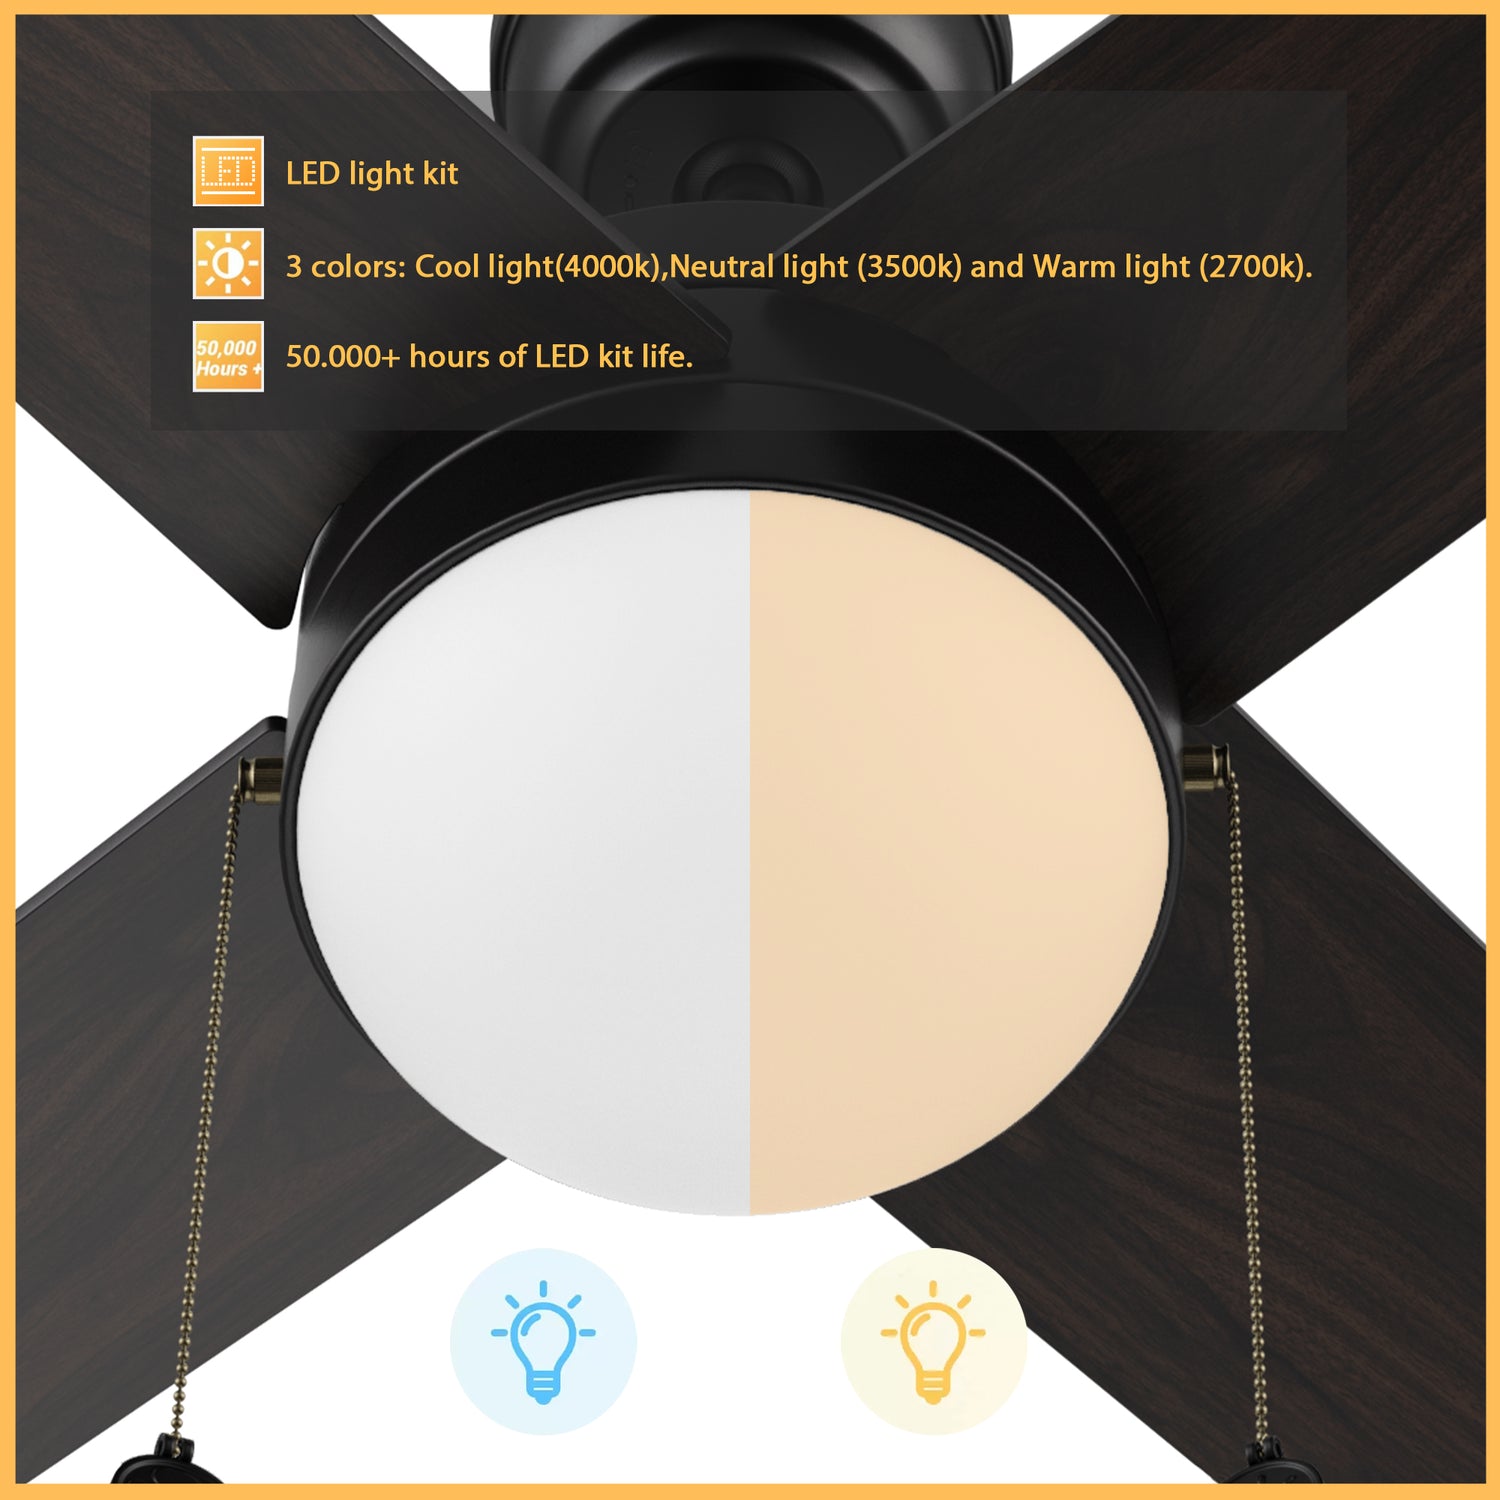 52-inch black ceiling fan with LED light kit, 18 energy power, and 1300 lumens brightness output. With more than 50000 hours of LED kit life, this ceiling fan light provides 3 colors from 2700K warm light to 4000K cool light. 